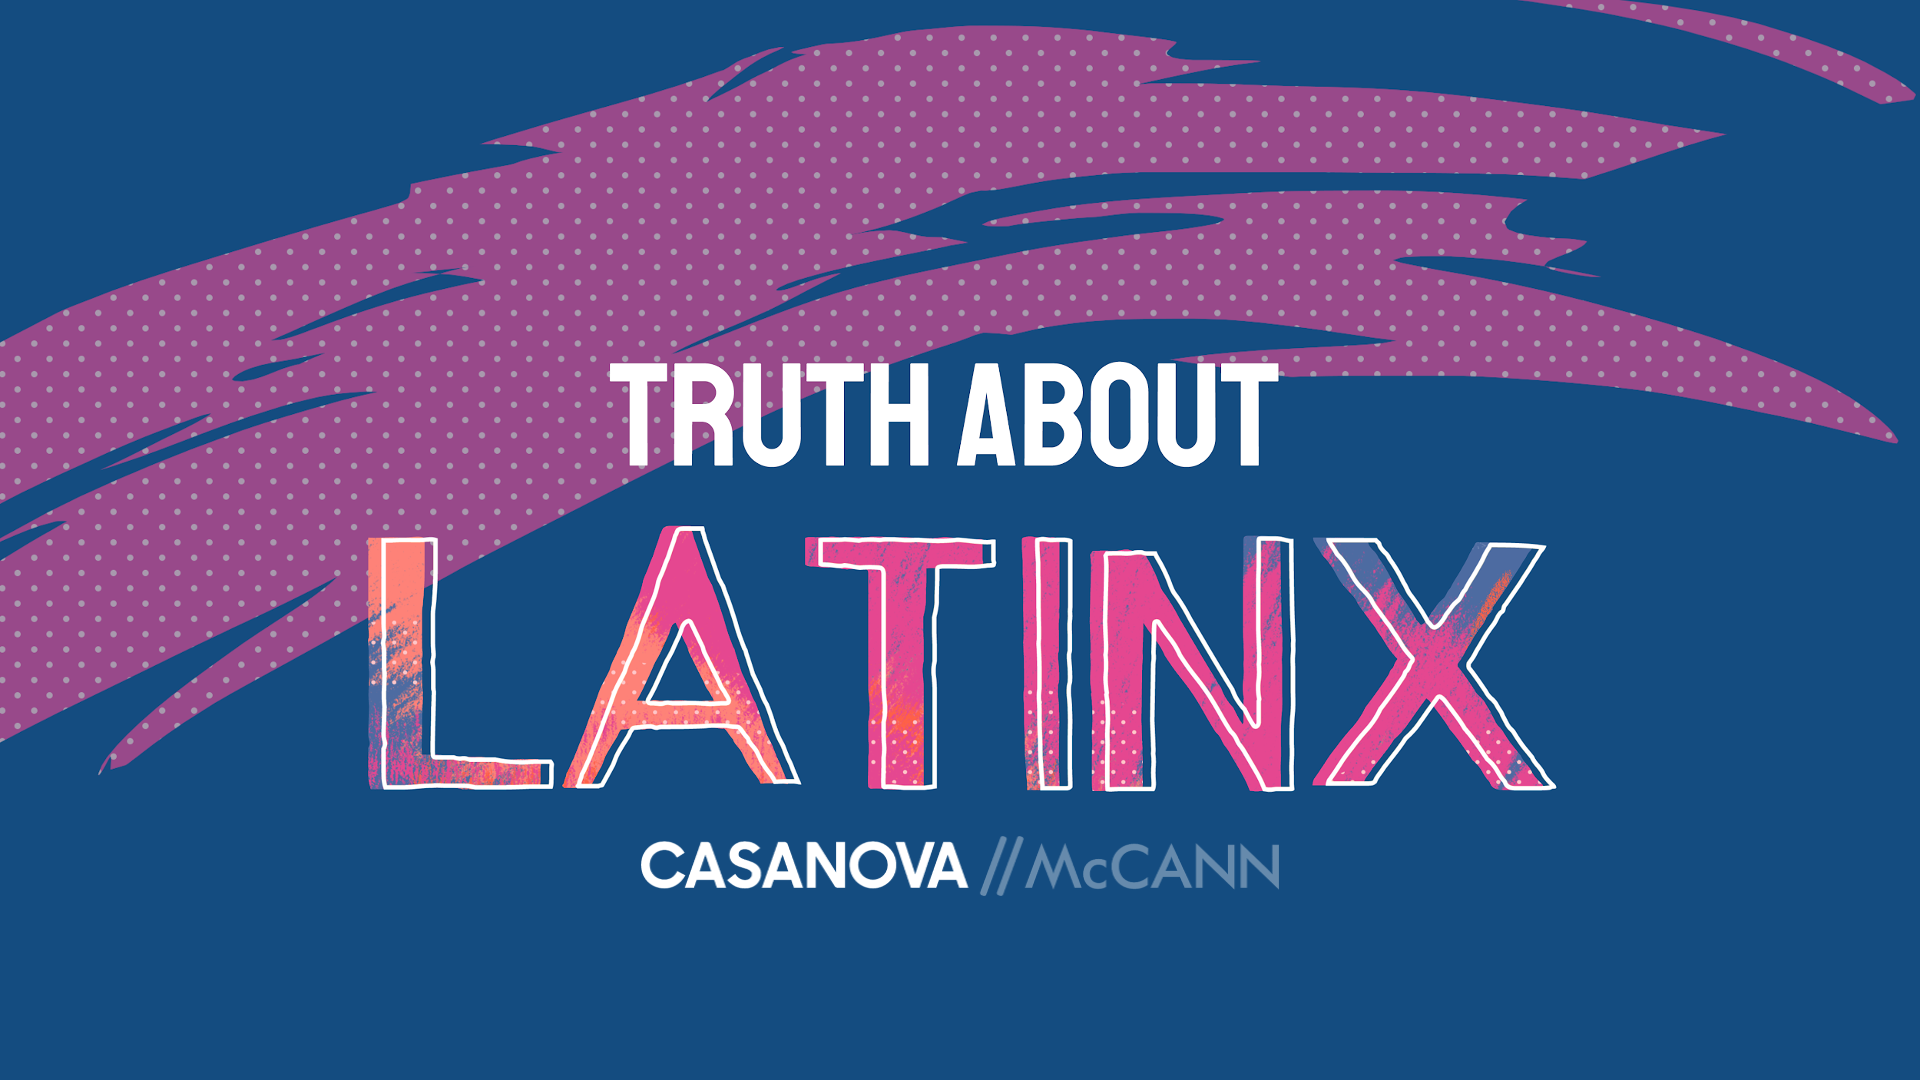 The Truth About Latinx by Casanova